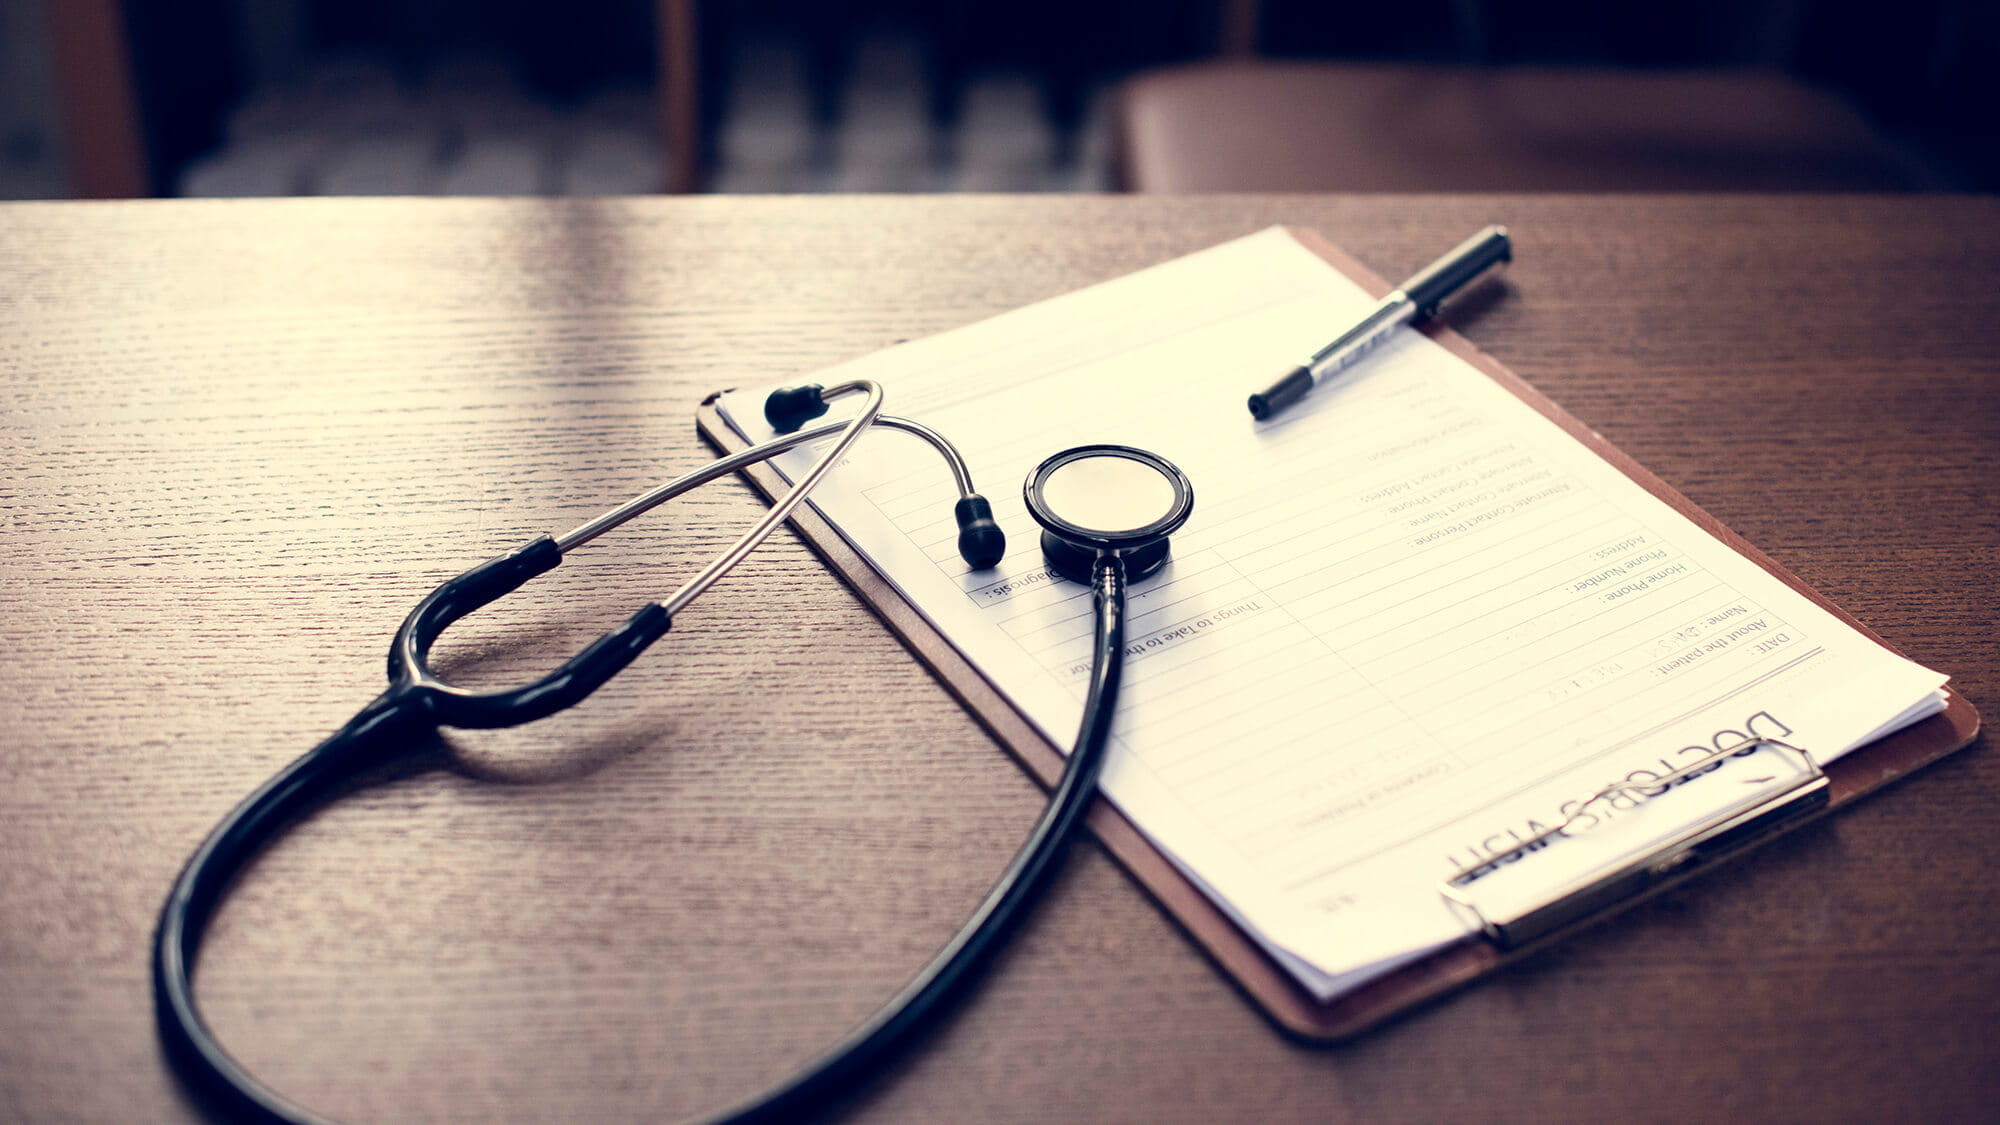 checkup form and stethoscope on desk